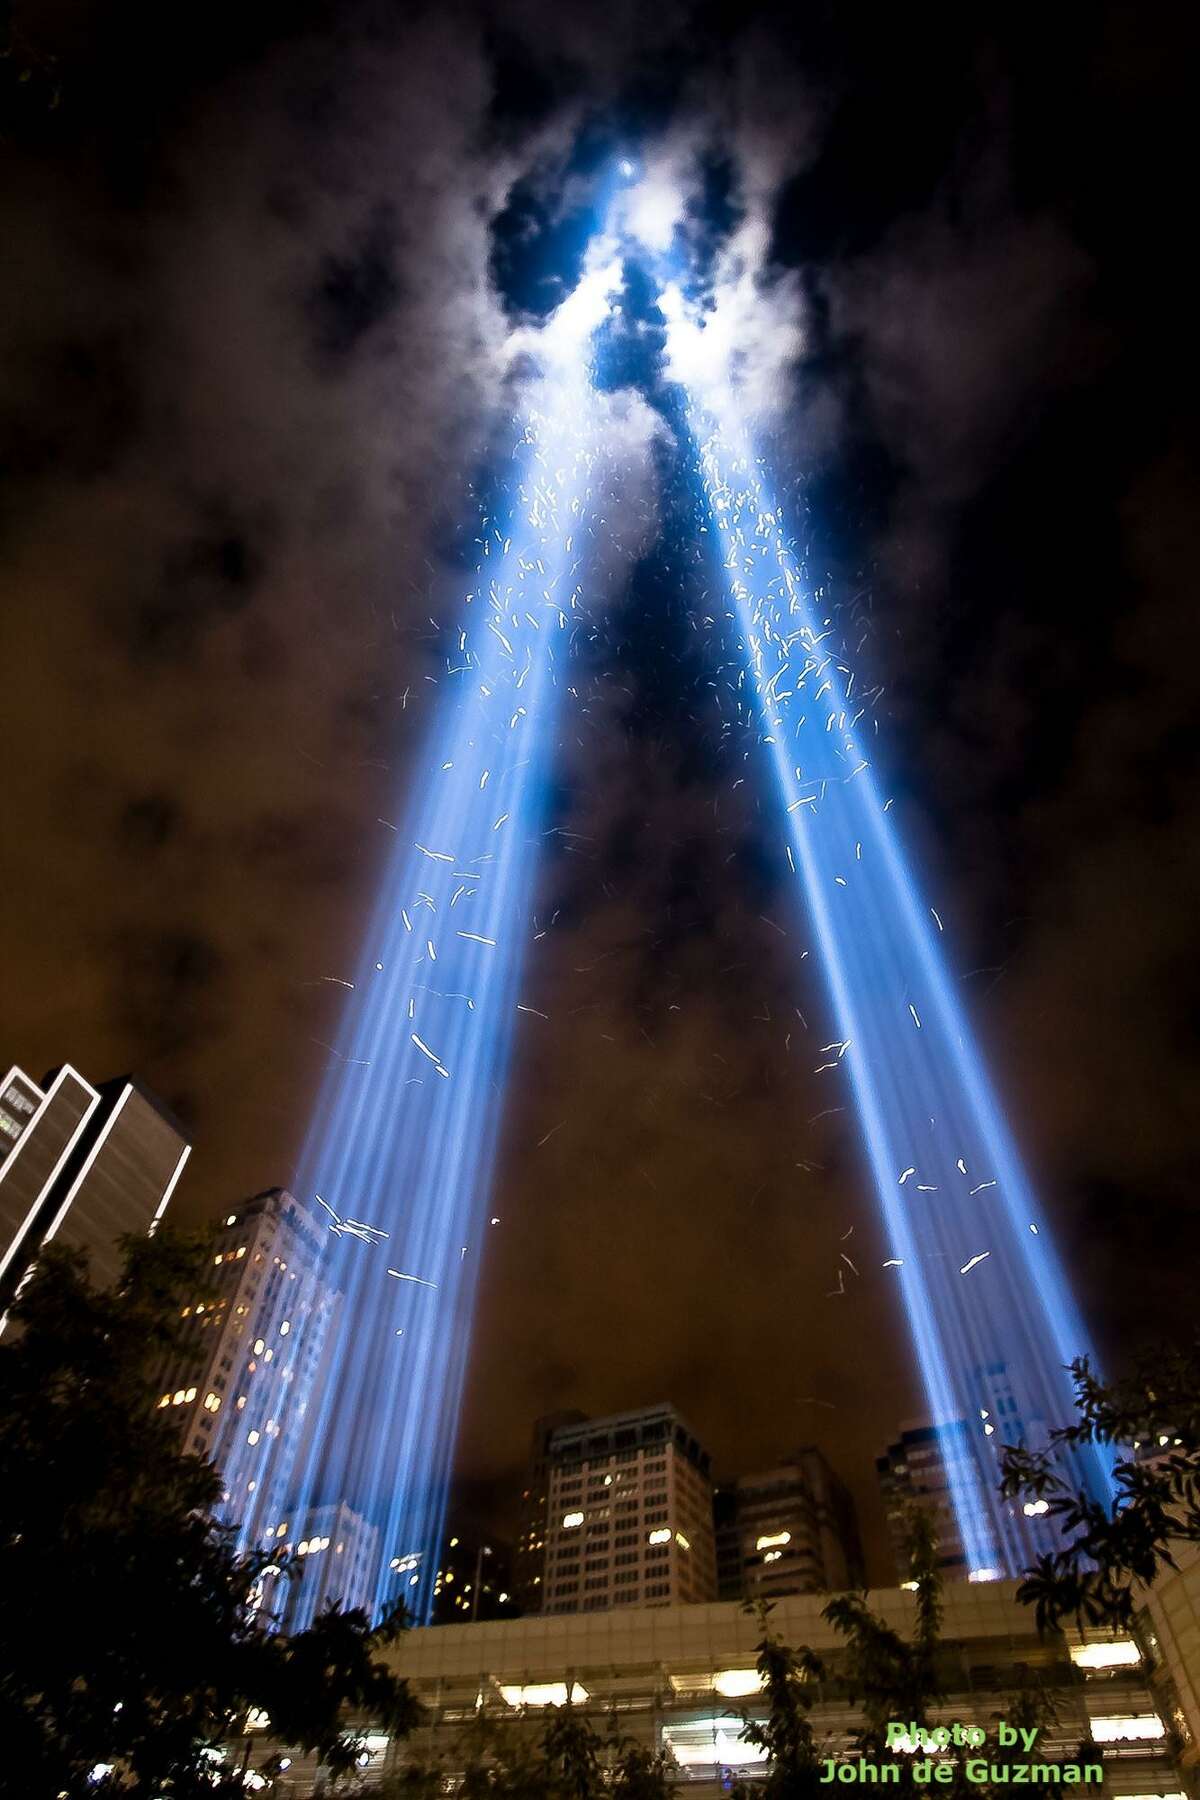 Shown here are birds flying through the lights at a Sept. 11 tribute in New York.